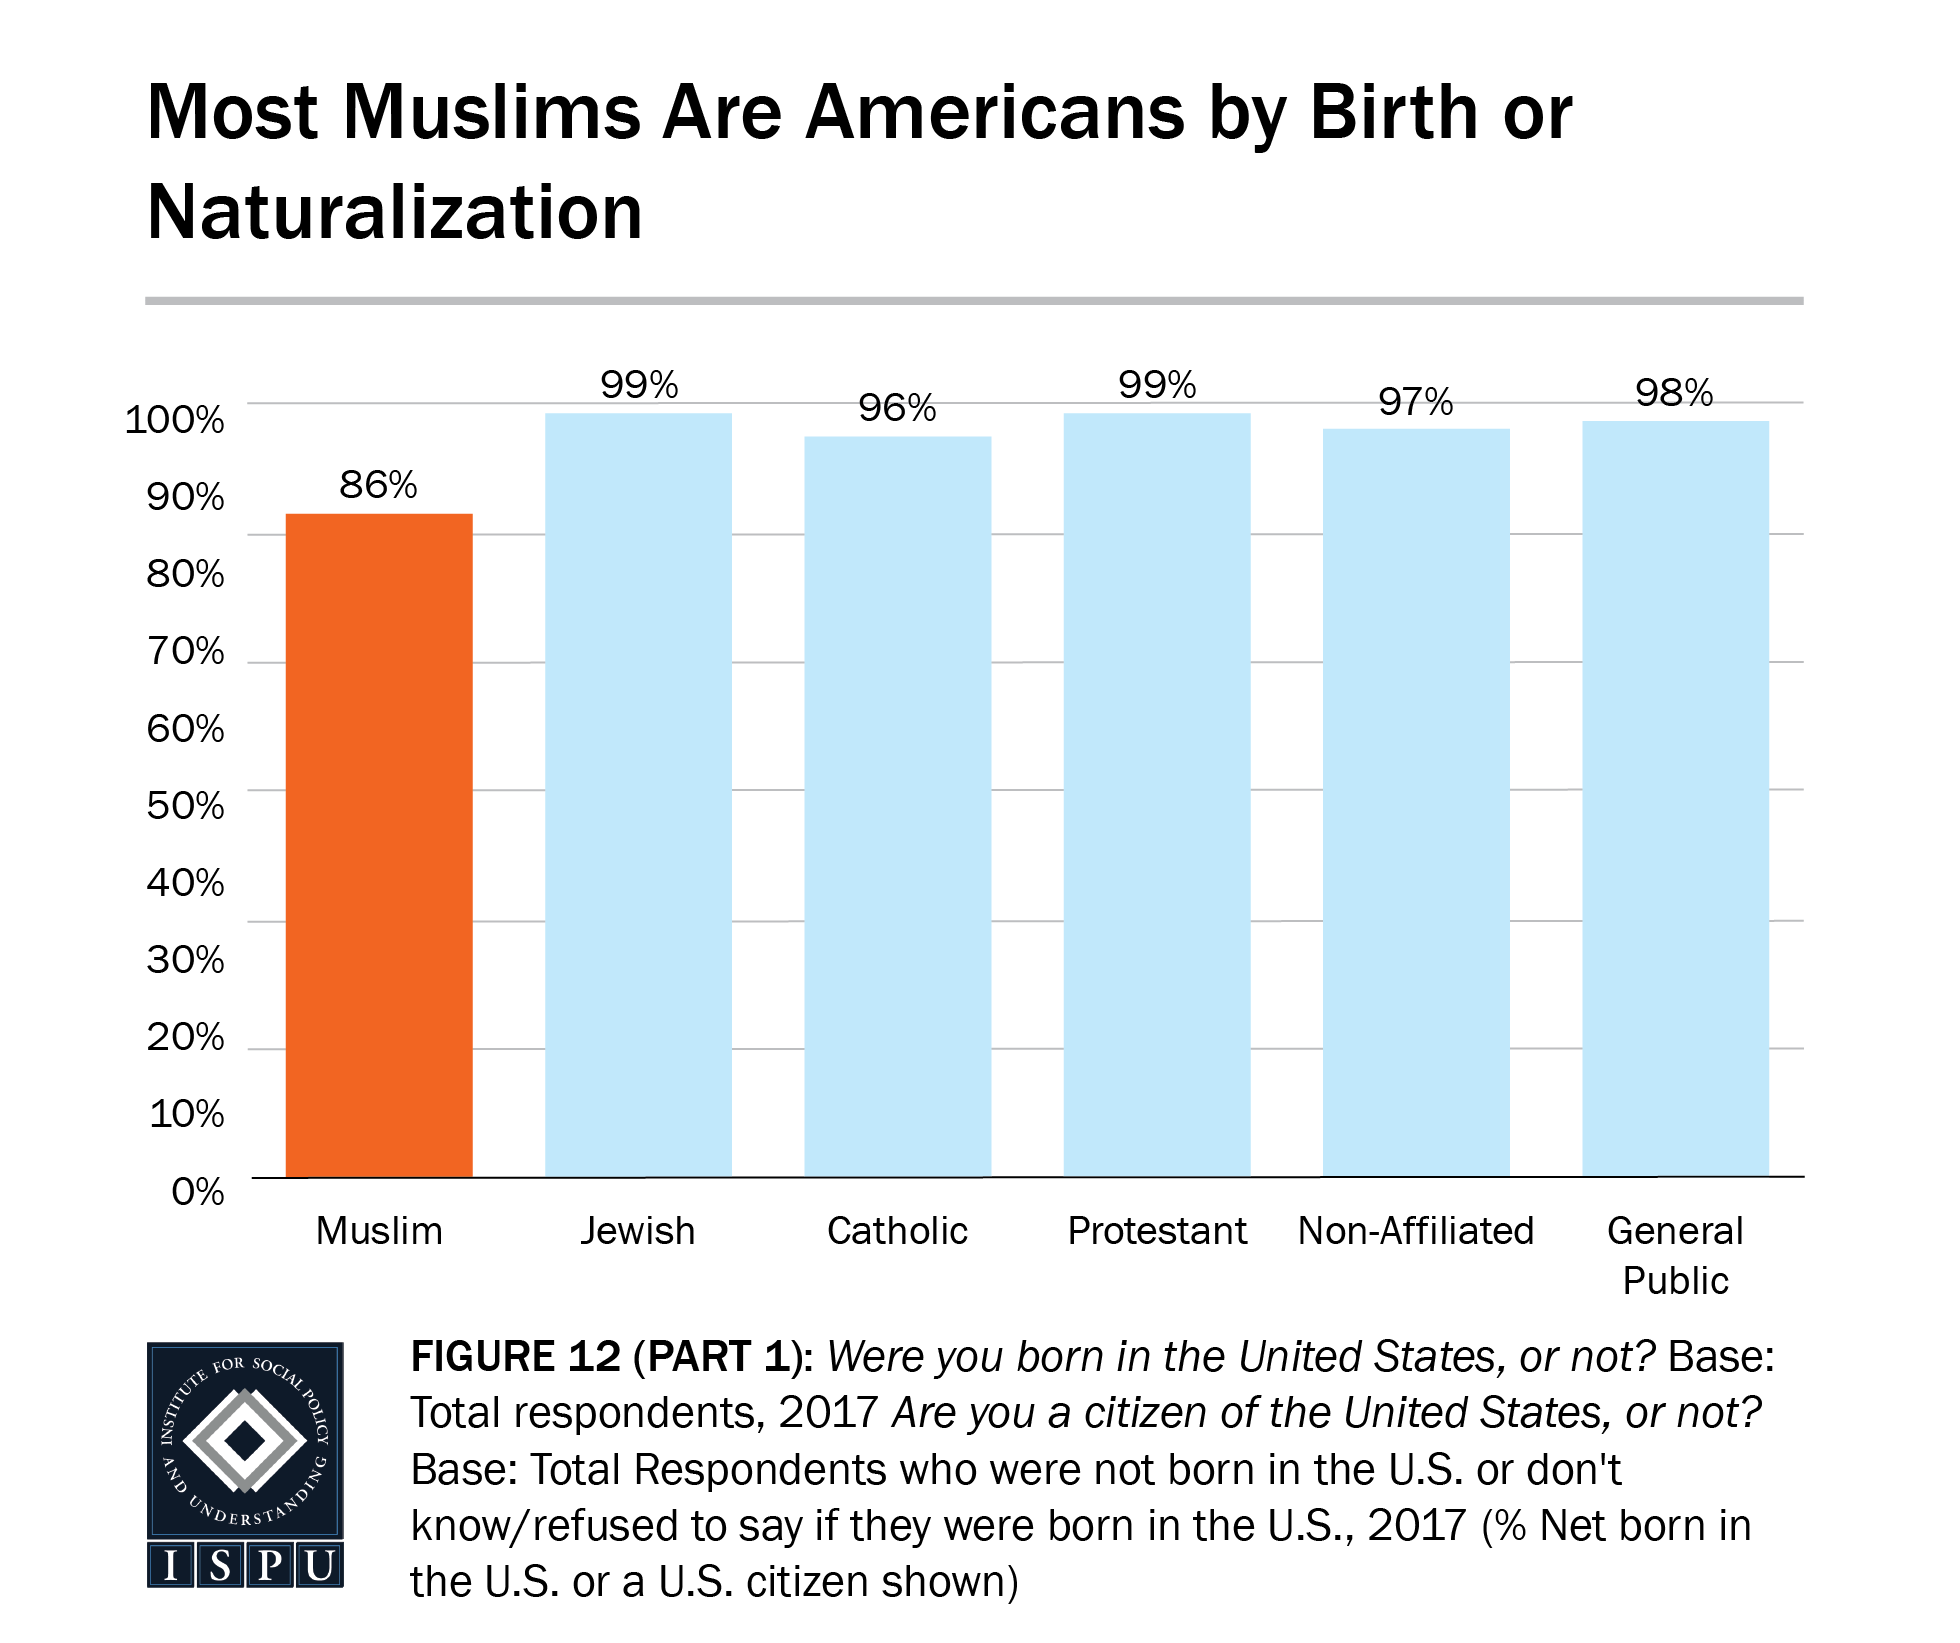 Figure 12, part 1: A bar graph showing that most Muslims (86%) are Americans by birth or naturalization